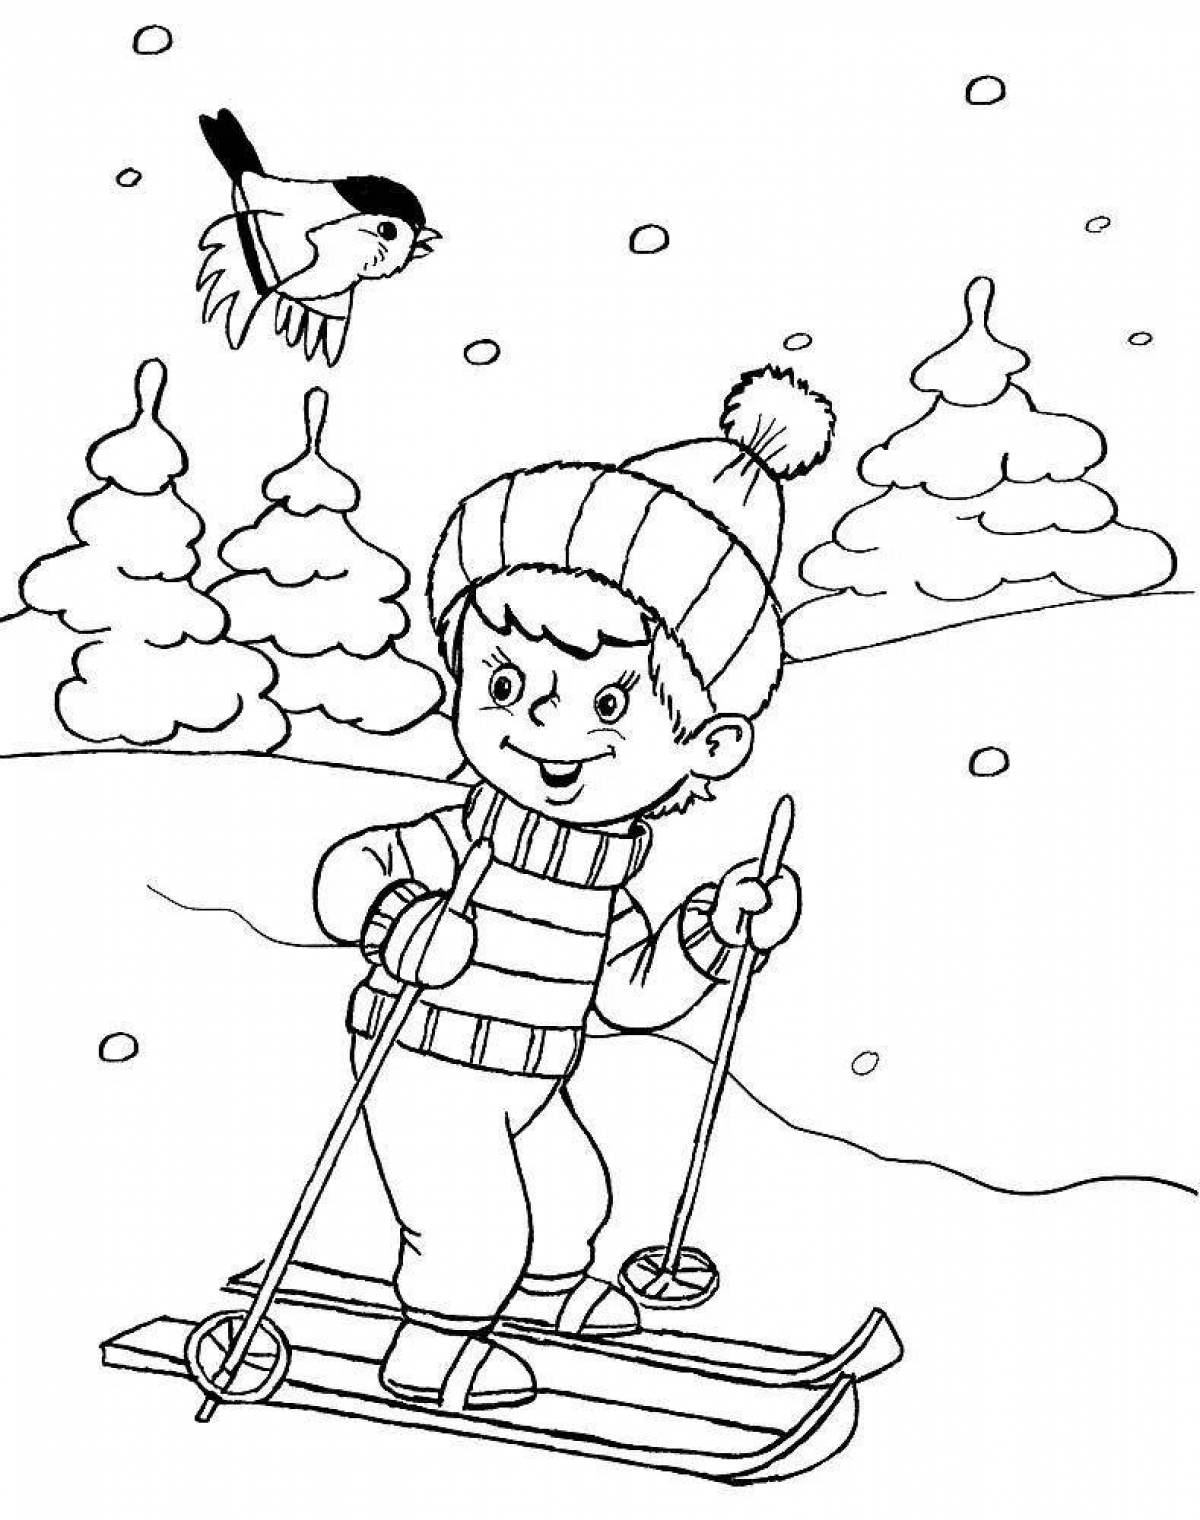 Adorable coloring book for kids